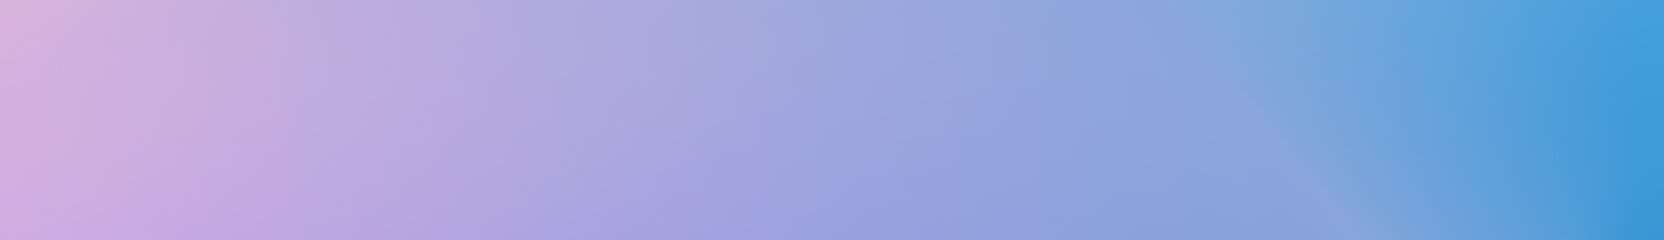 An image of a blue and purple gradient background.